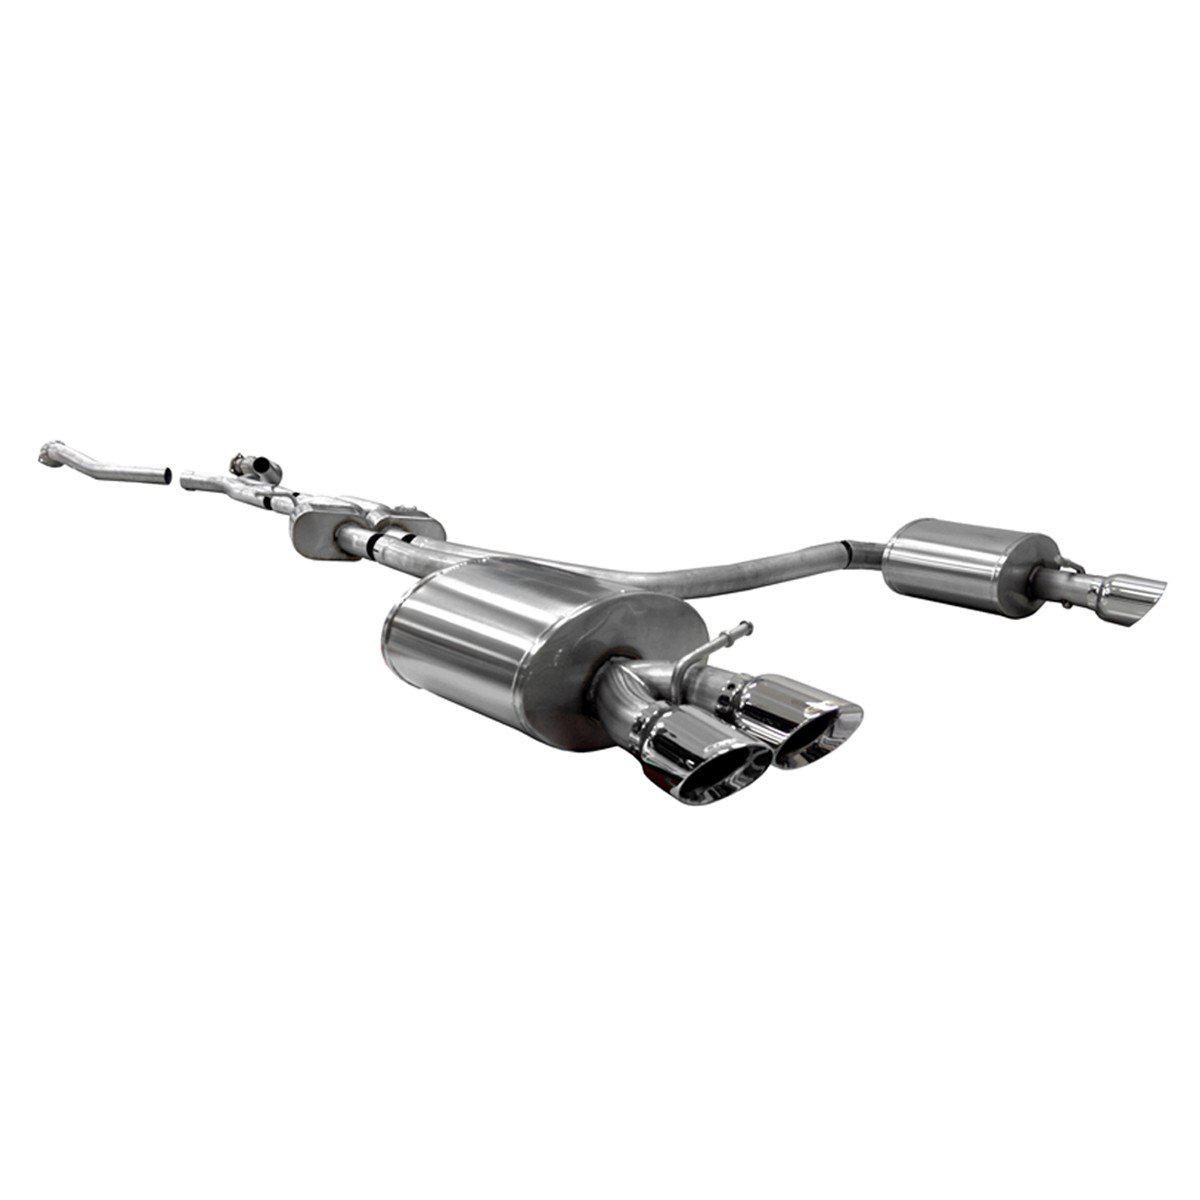 Corsa Performance B8 Audi S5 4.2l Cat-Back Exhaust System-A Little Tuning Co